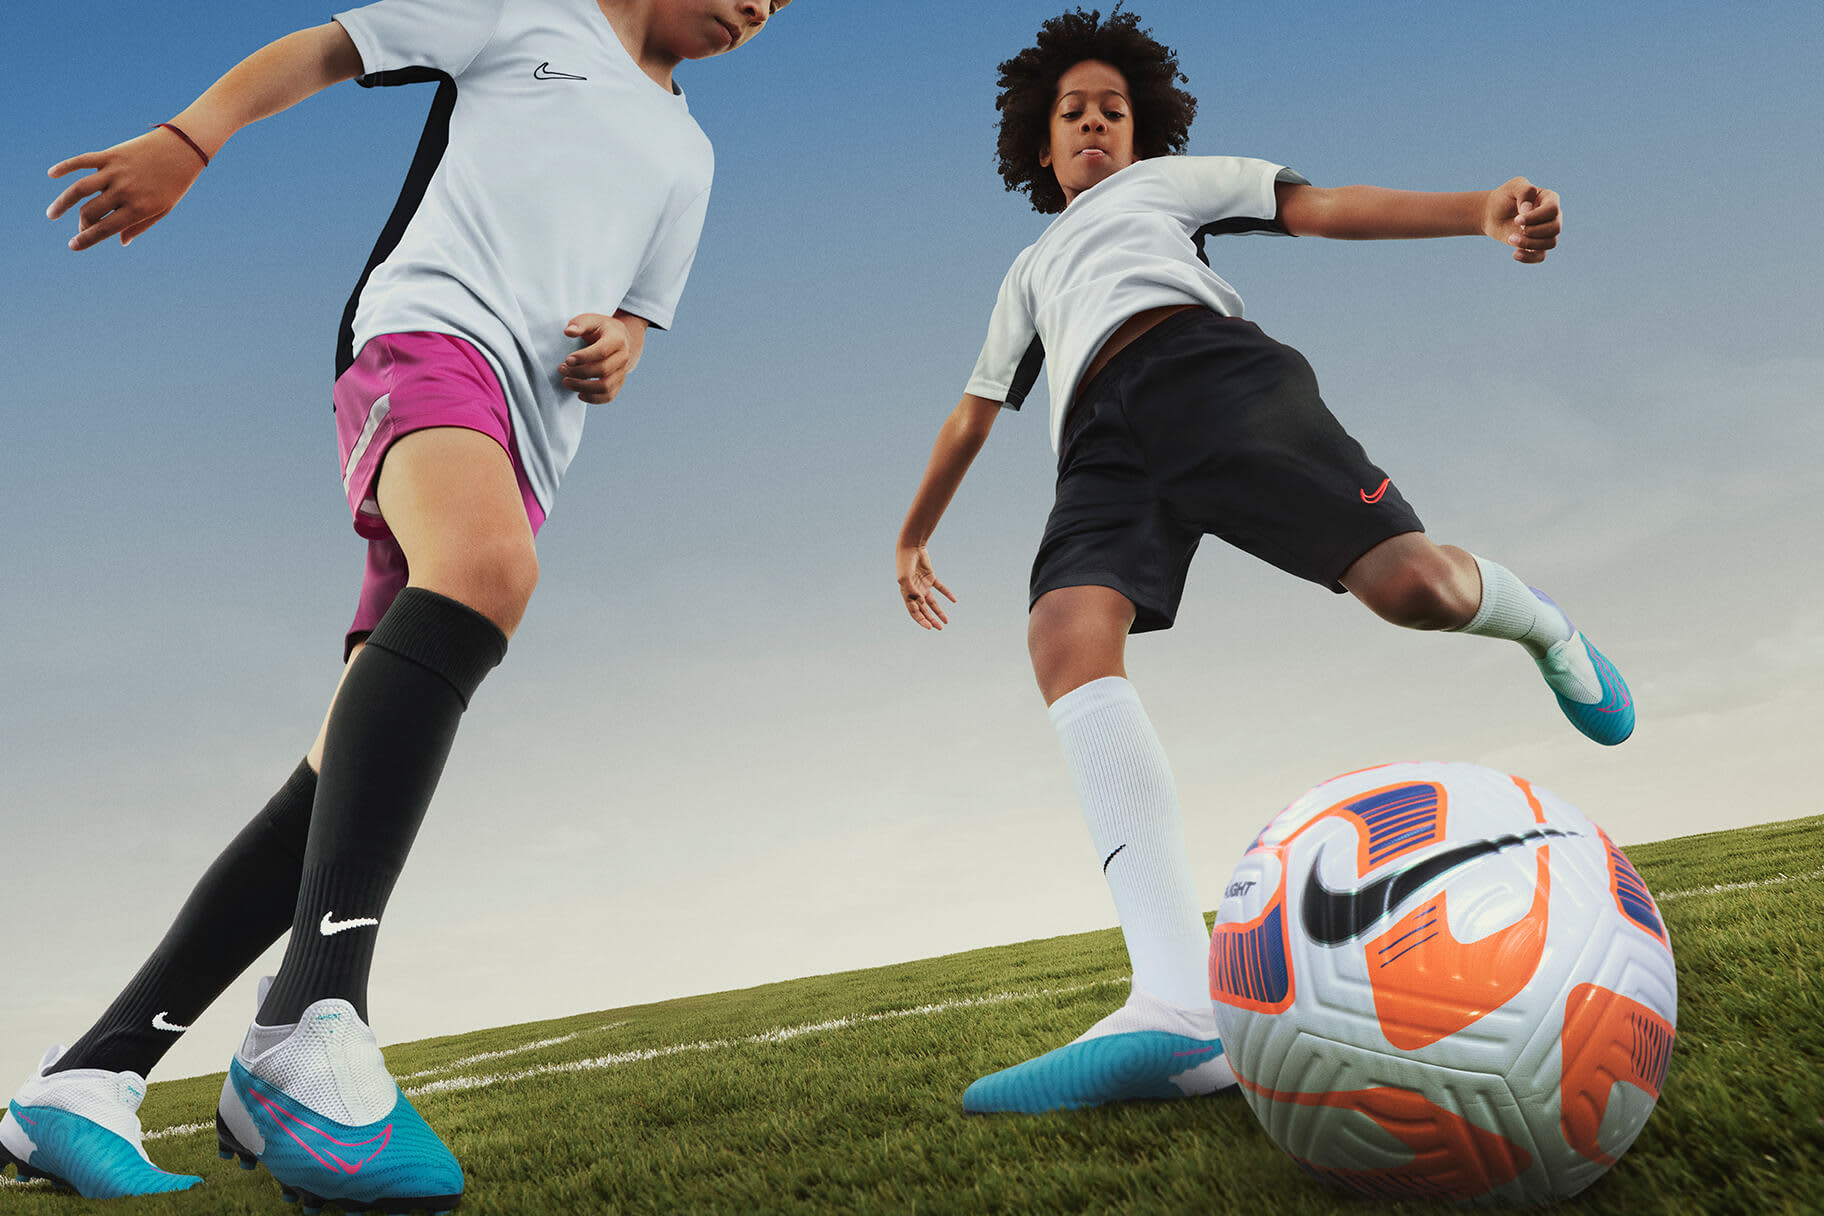 How to Choose the Best Nike Football Boots for Kids